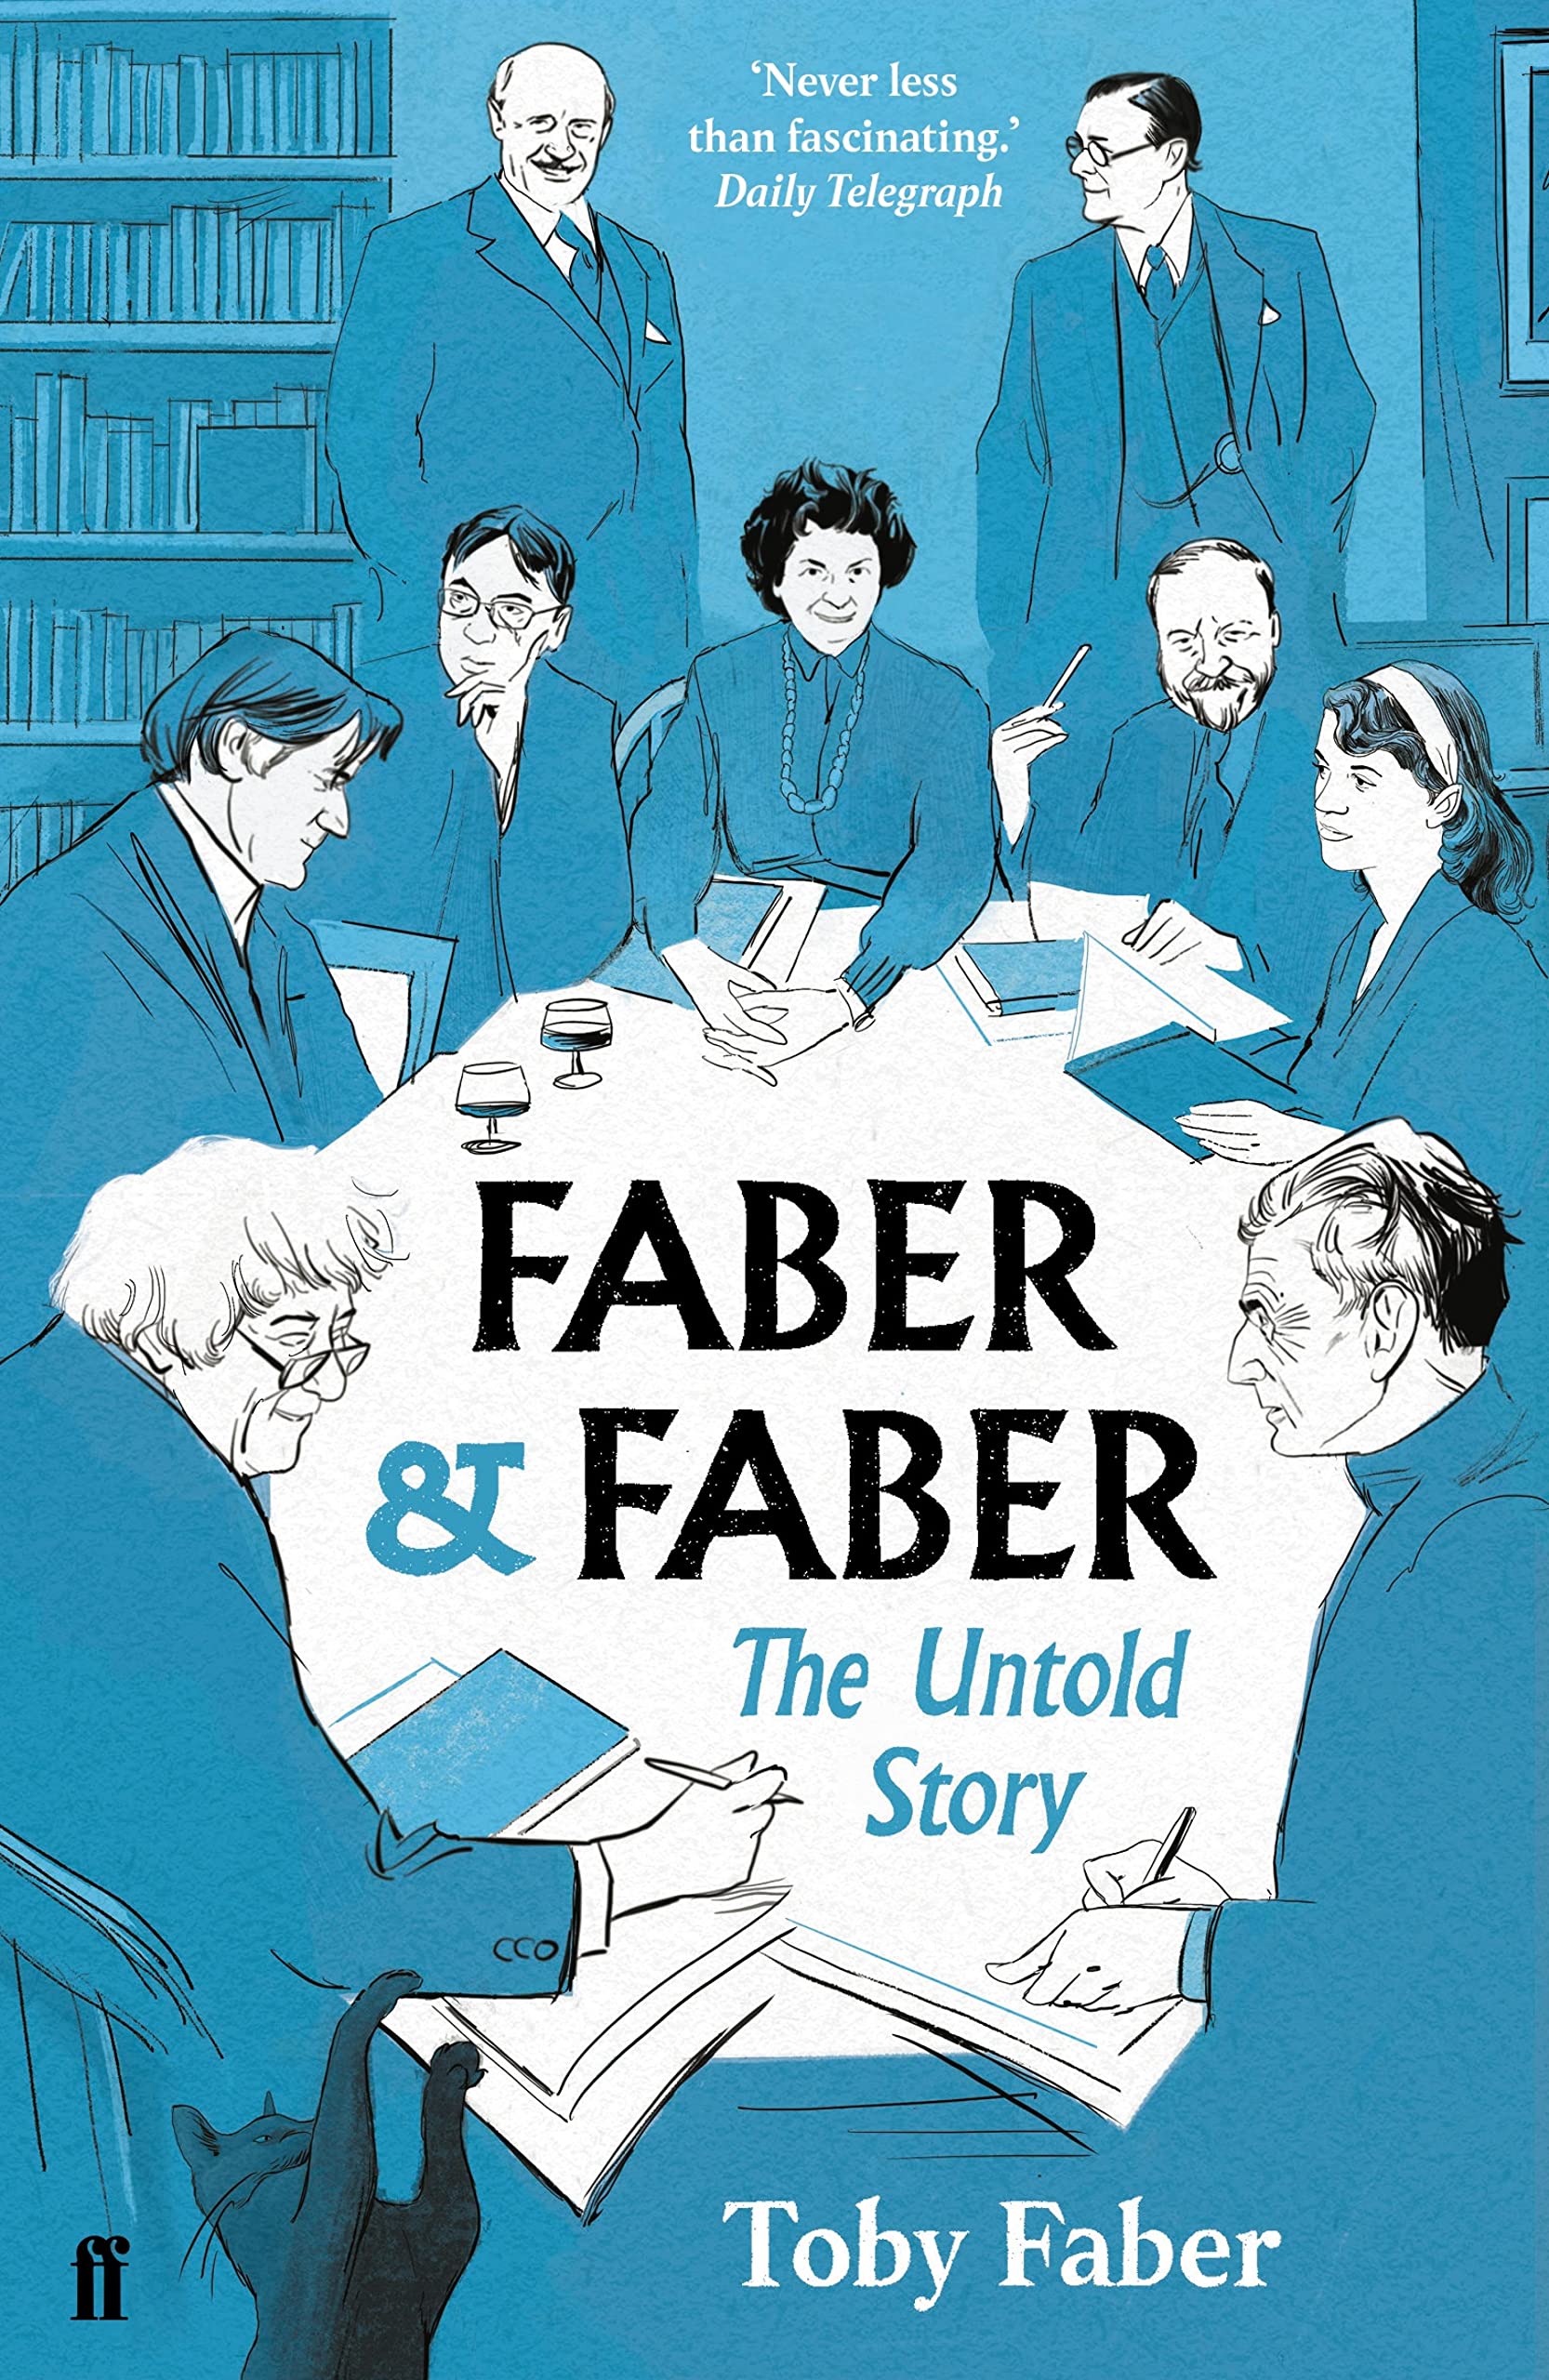 Faber & Faber: The Untold Story of a Great Publishing House